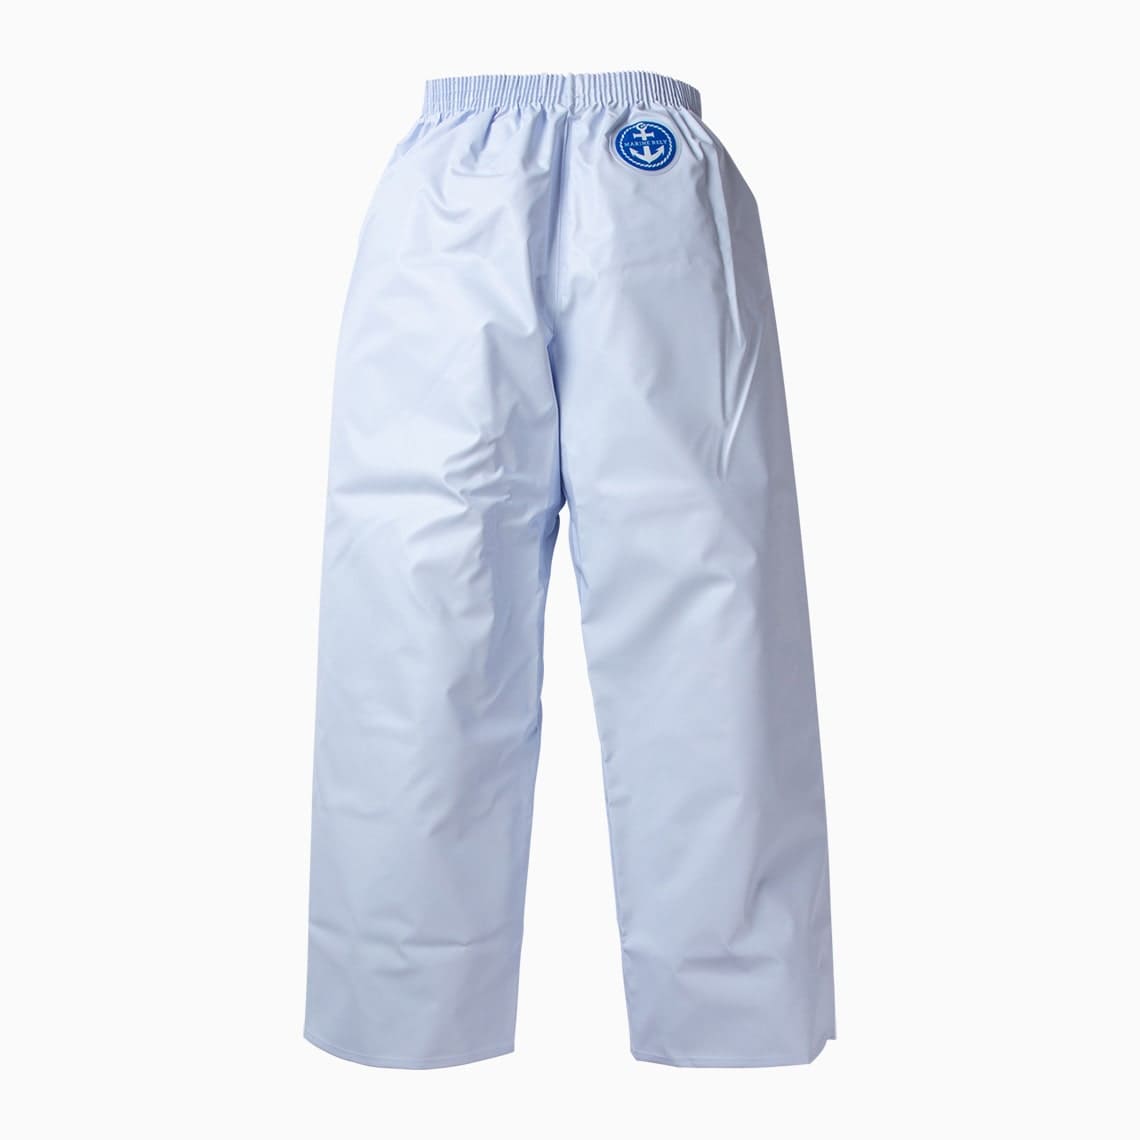 Marine rely pants White